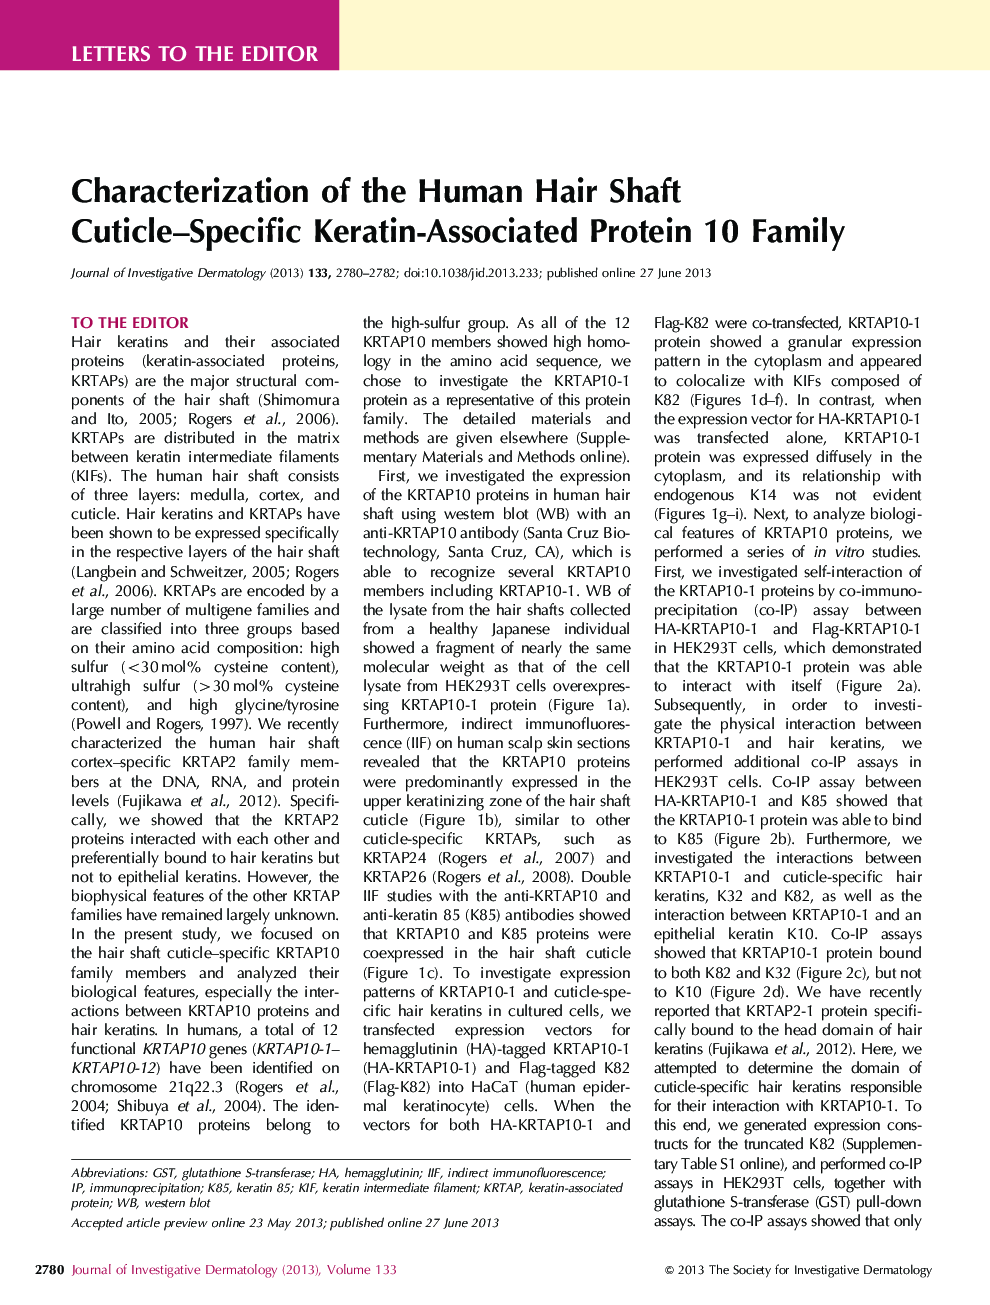 Characterization of the Human Hair Shaft Cuticle-Specific Keratin-Associated Protein 10 Family